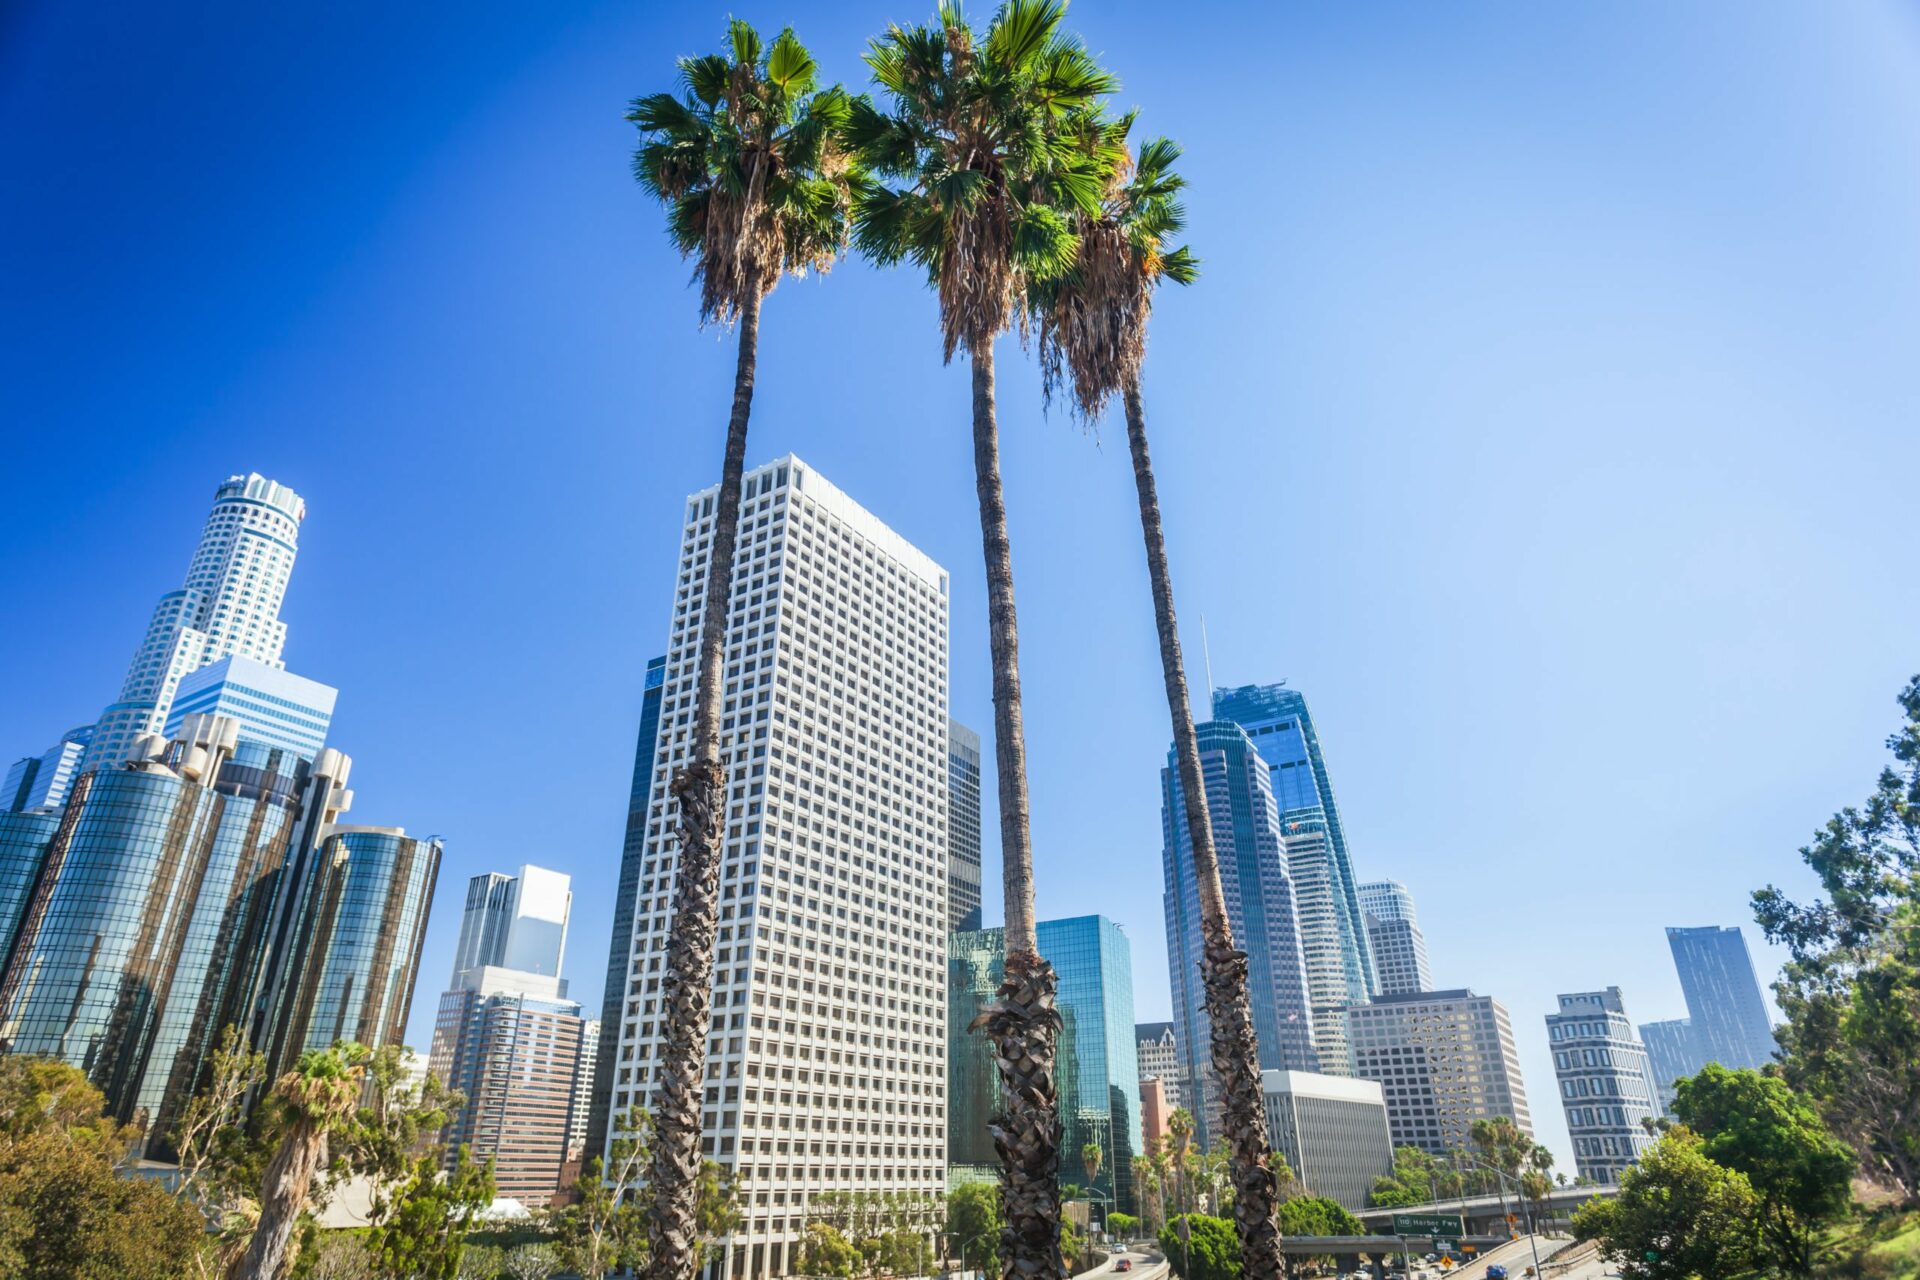 Built in LA: LA’s Top Tech Funding Rounds Totaled Nearly $500M in April